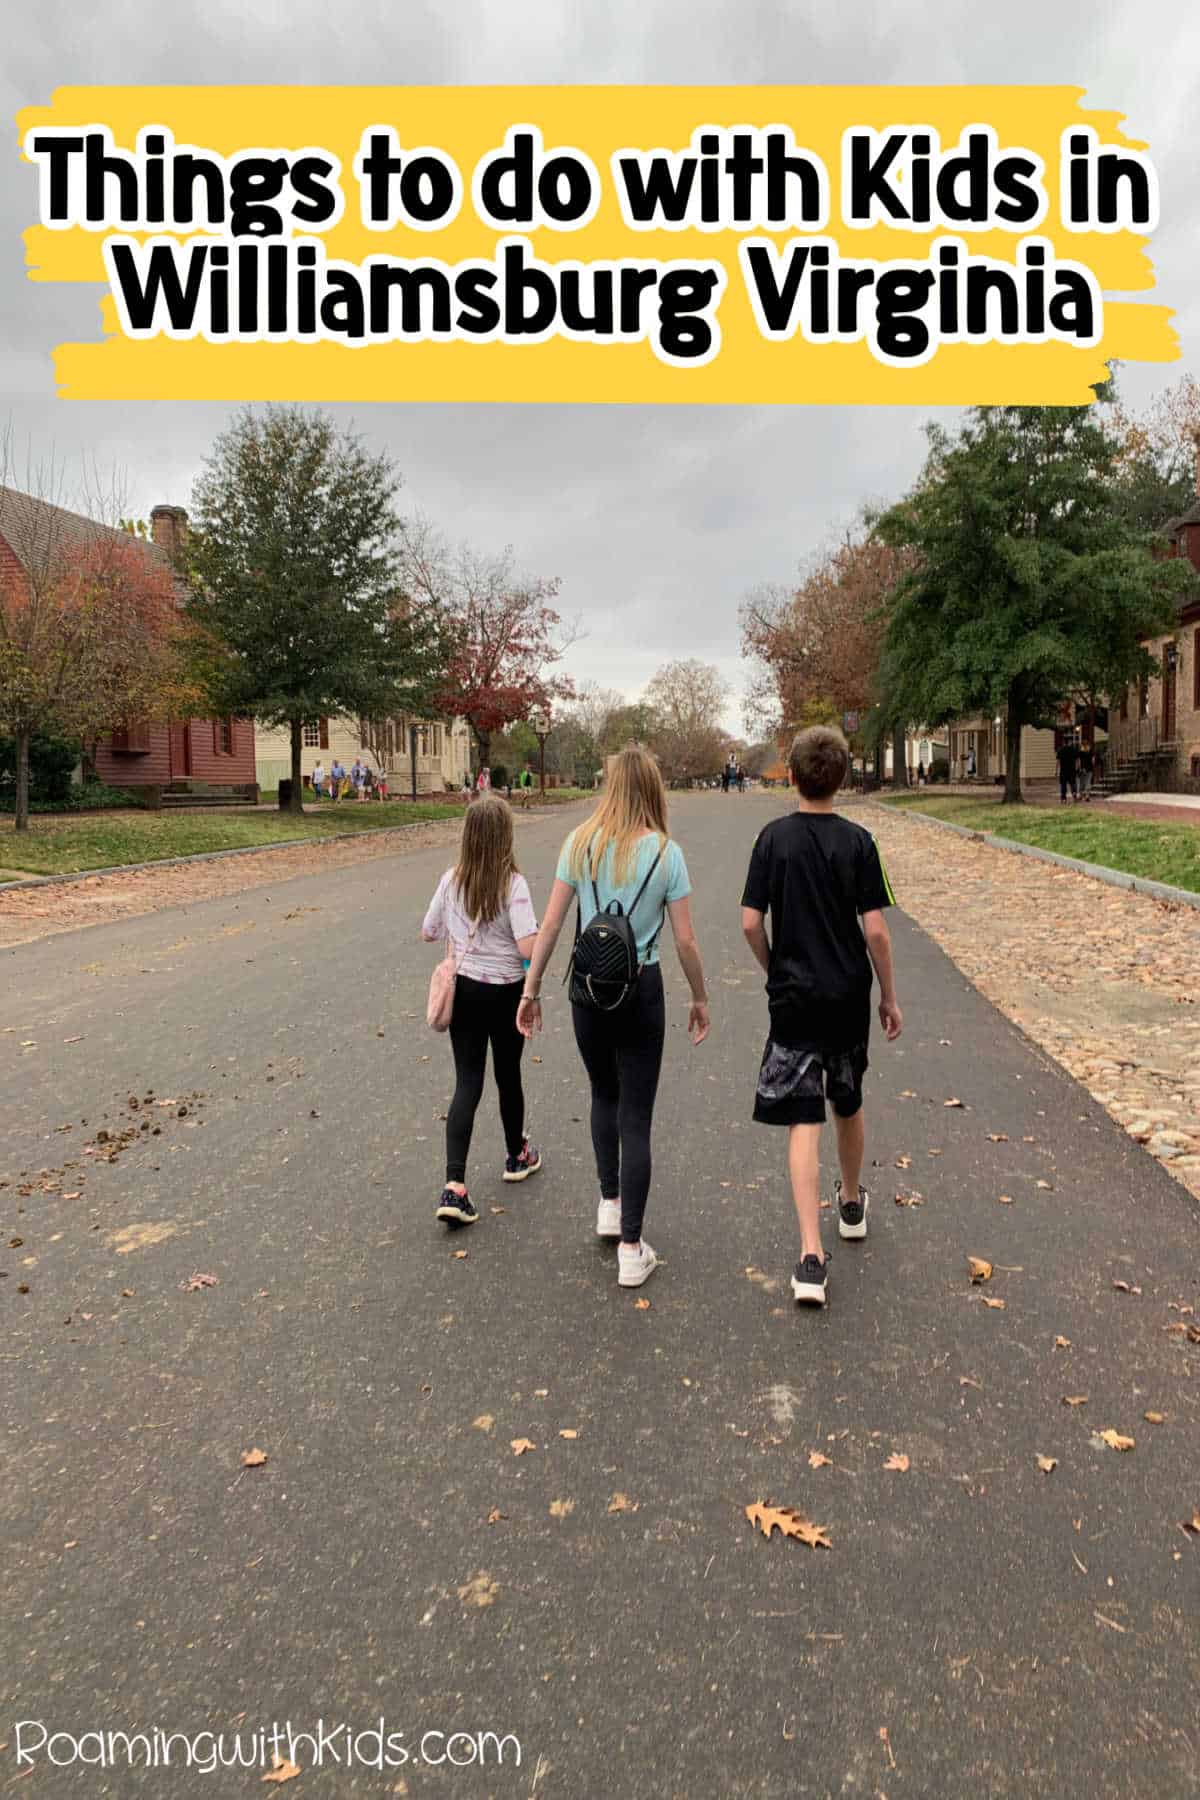 Things to do in Williamsburg Virginia with Kids